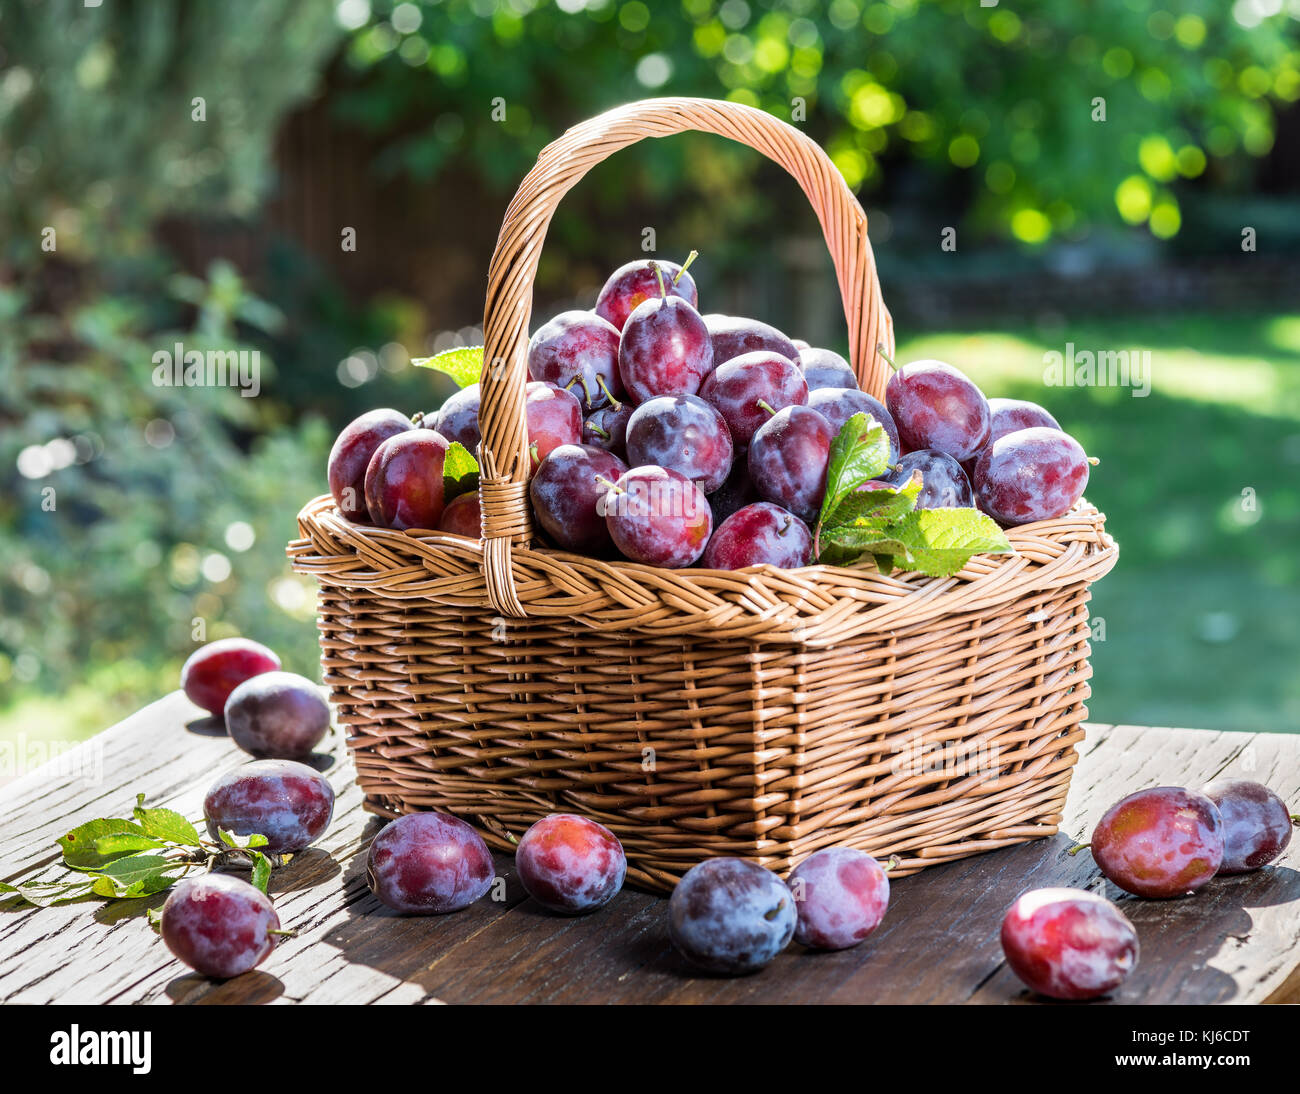 Plum harvest. Ripe plums in the basket on the table. Garden at the background. Stock Photo